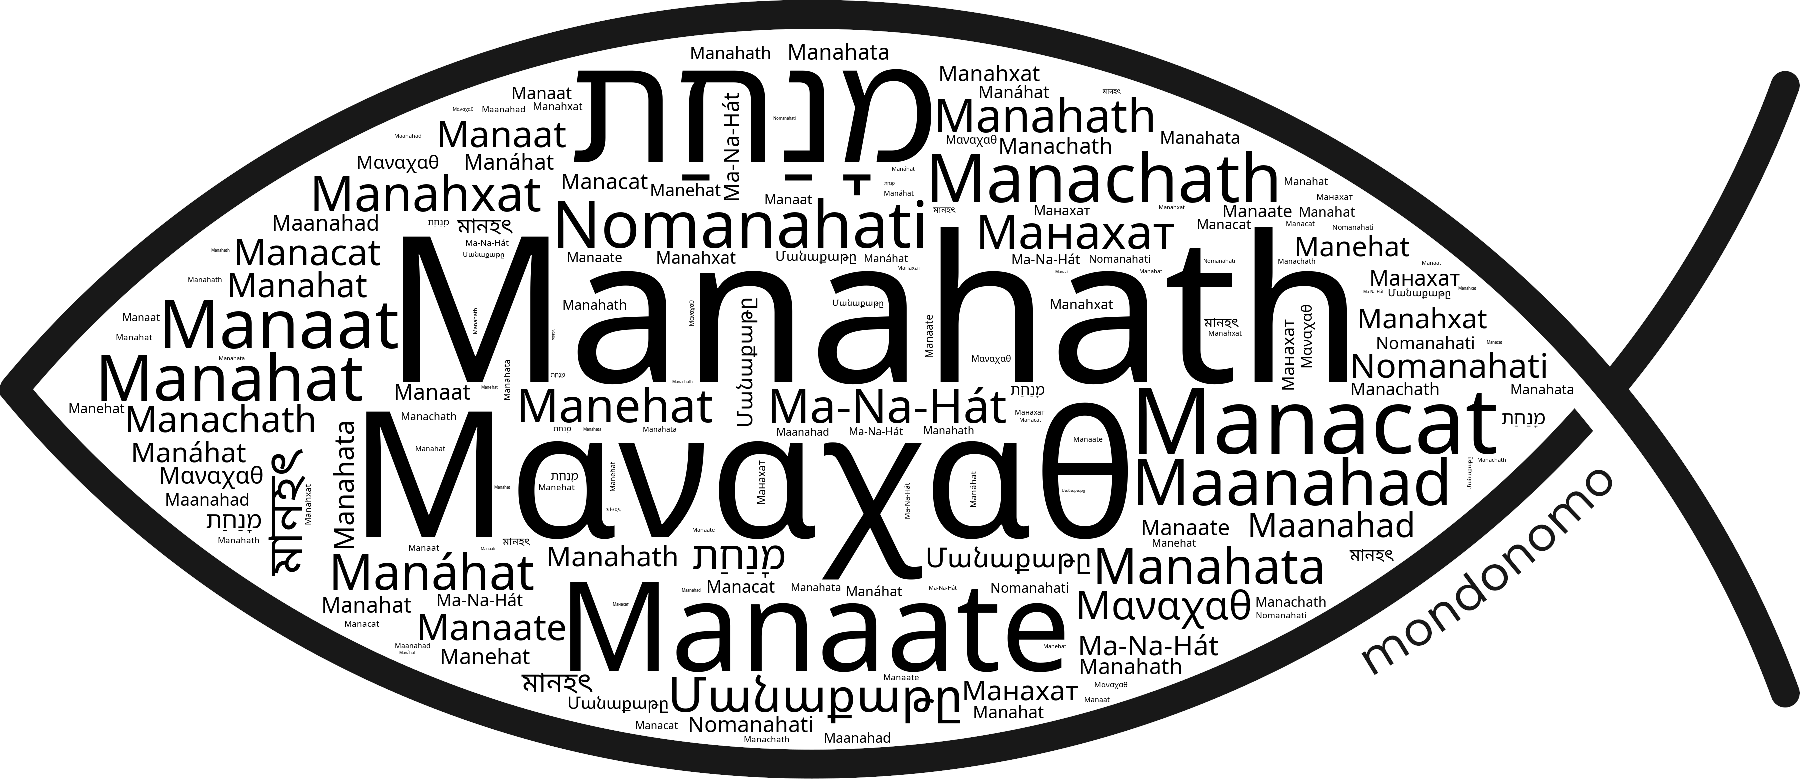 Name Manahath in the world's Bibles